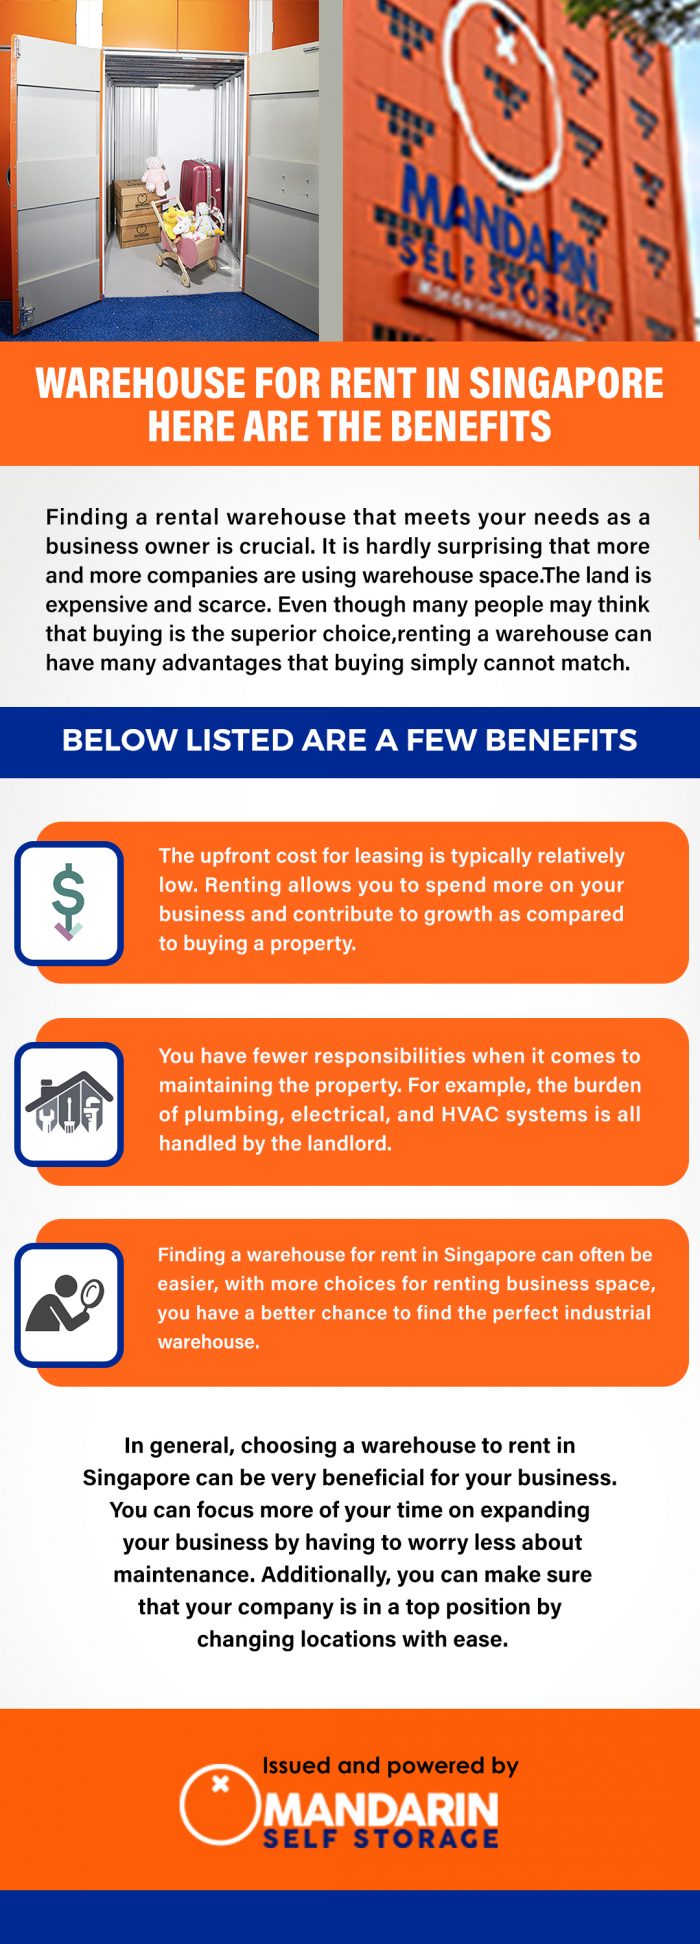 Warehouse for rent in Singapore- Here are the benefits